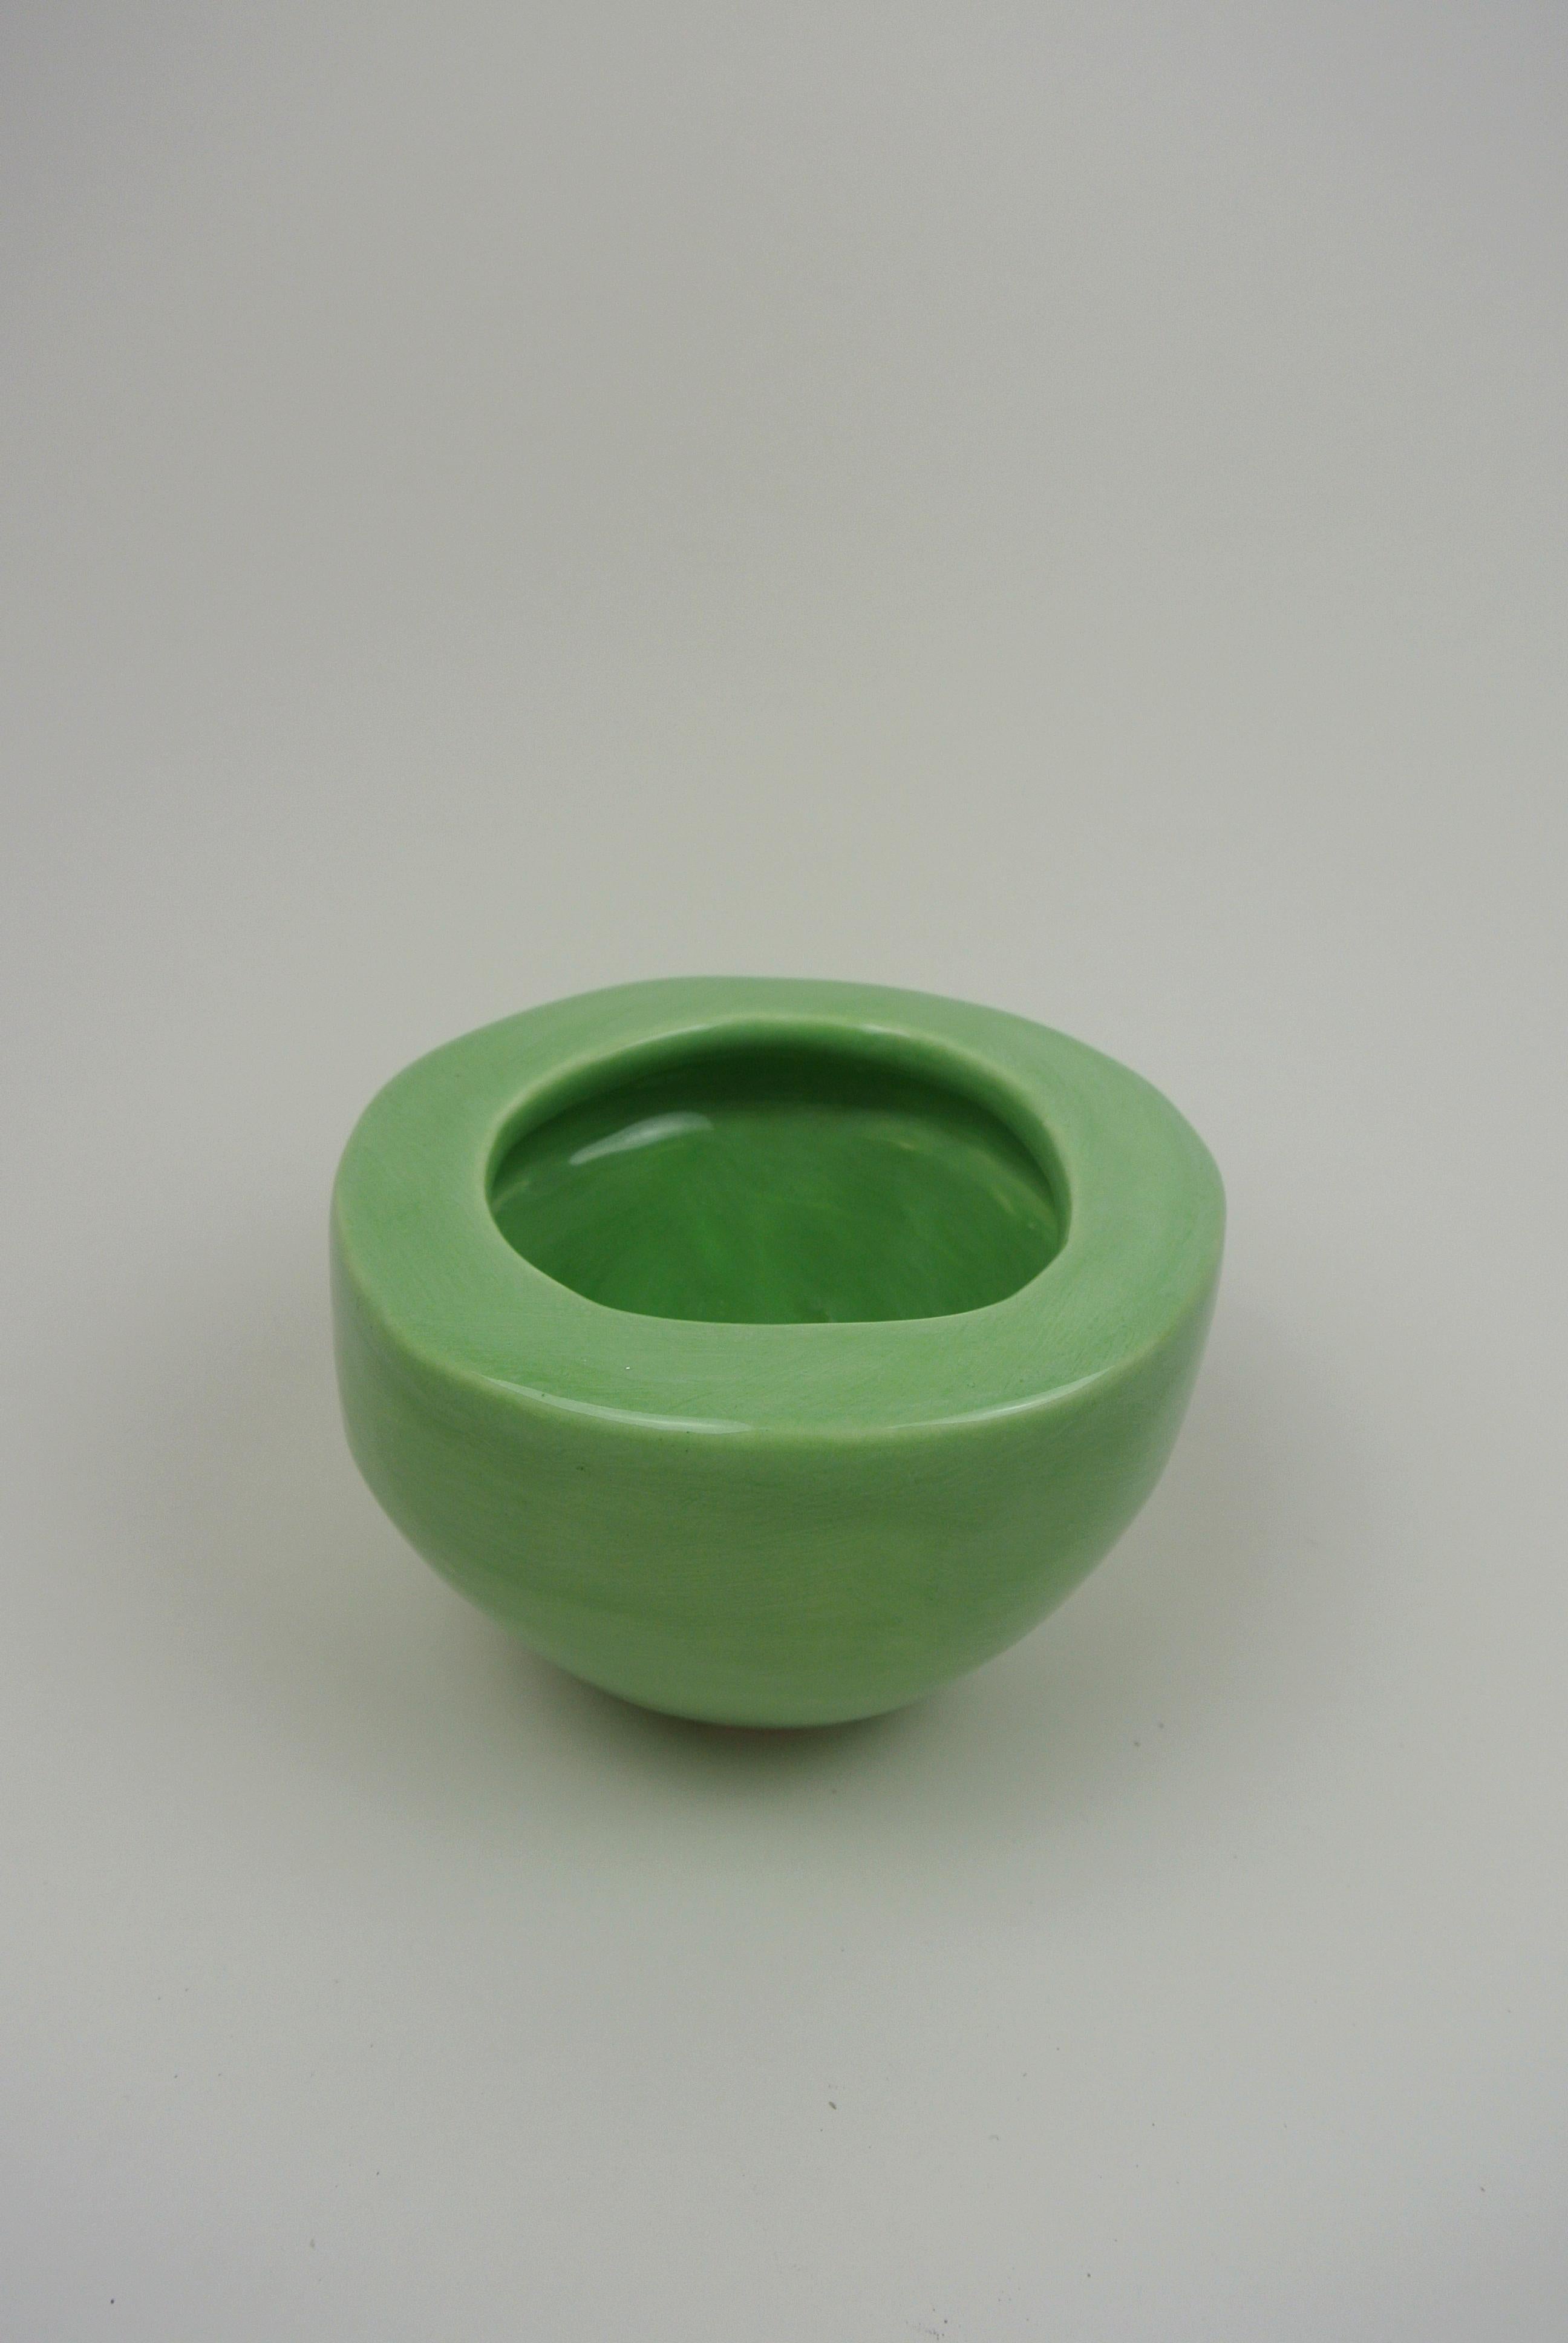 Asymmetric white porcelain vessel with wide rim. Carved by hand and glazed with green glossy glaze. Holds water.